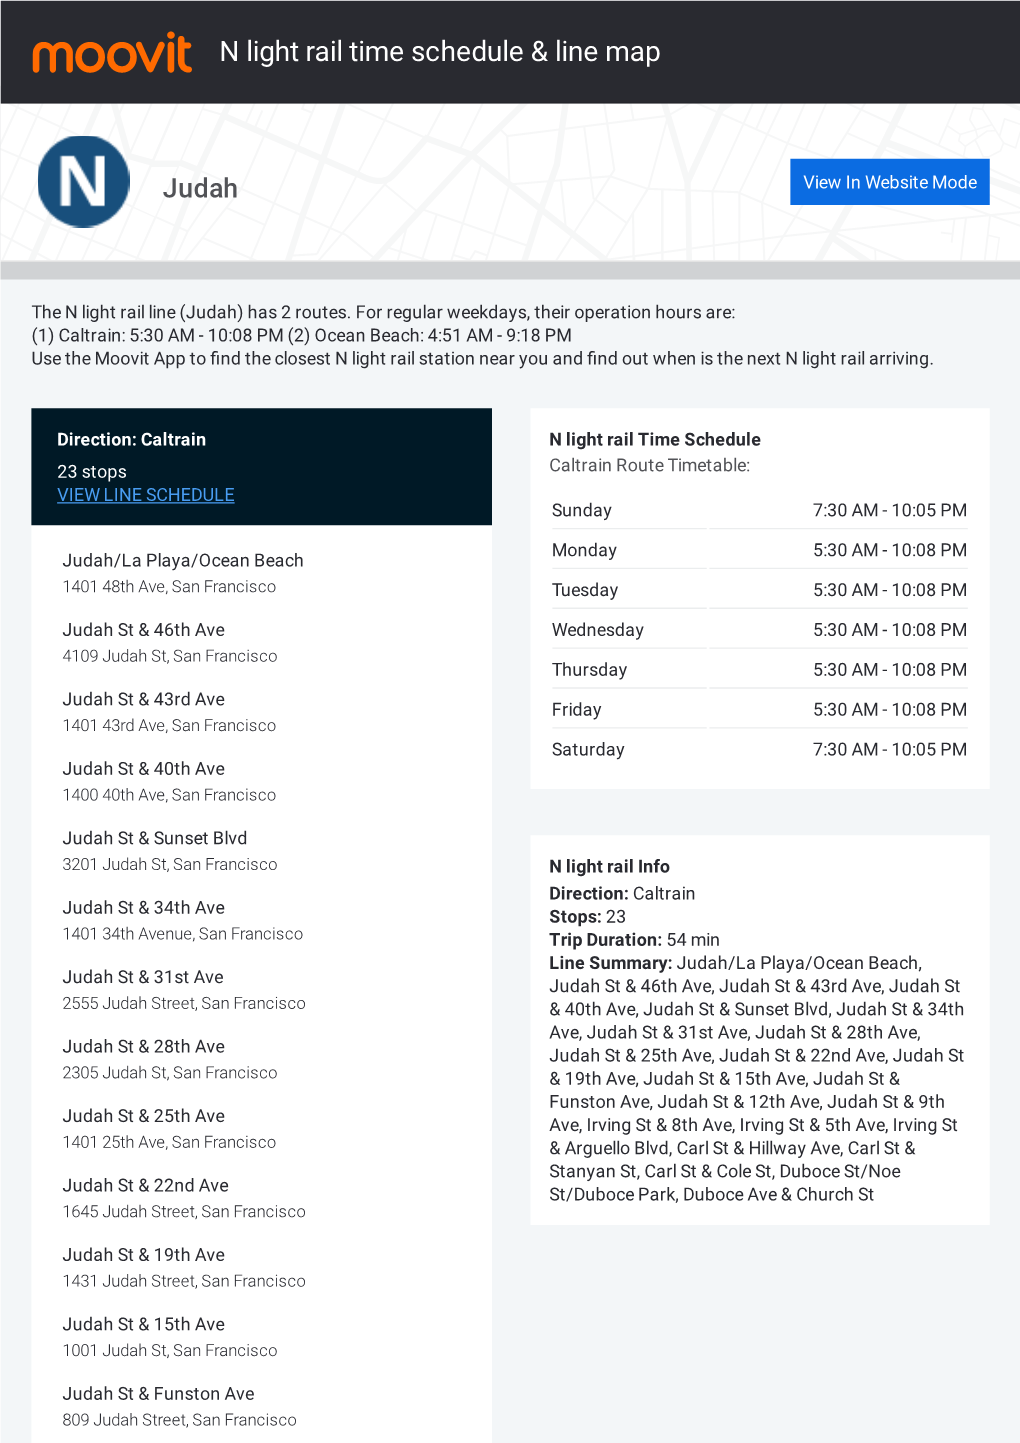 N Light Rail Time Schedule & Line Route